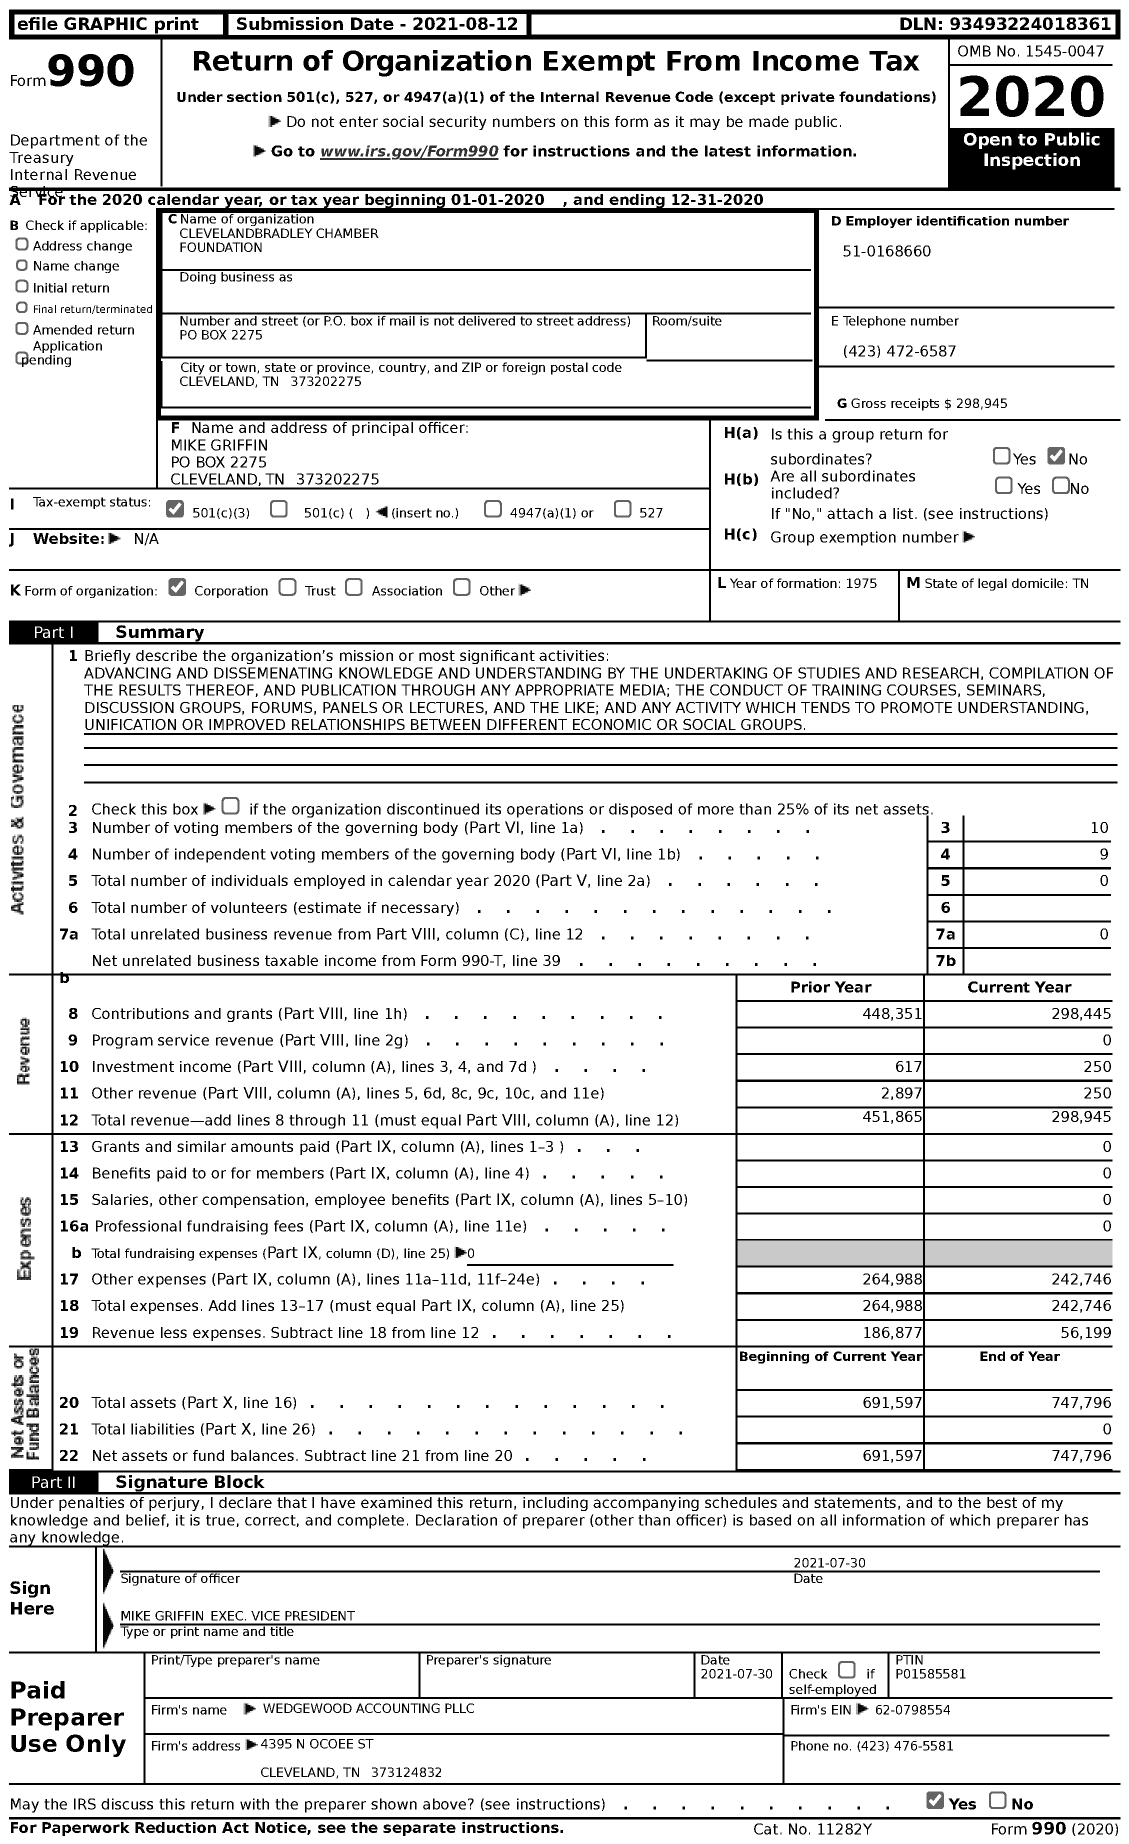 Image of first page of 2020 Form 990 for Clevelandbradley Chamber Foundation